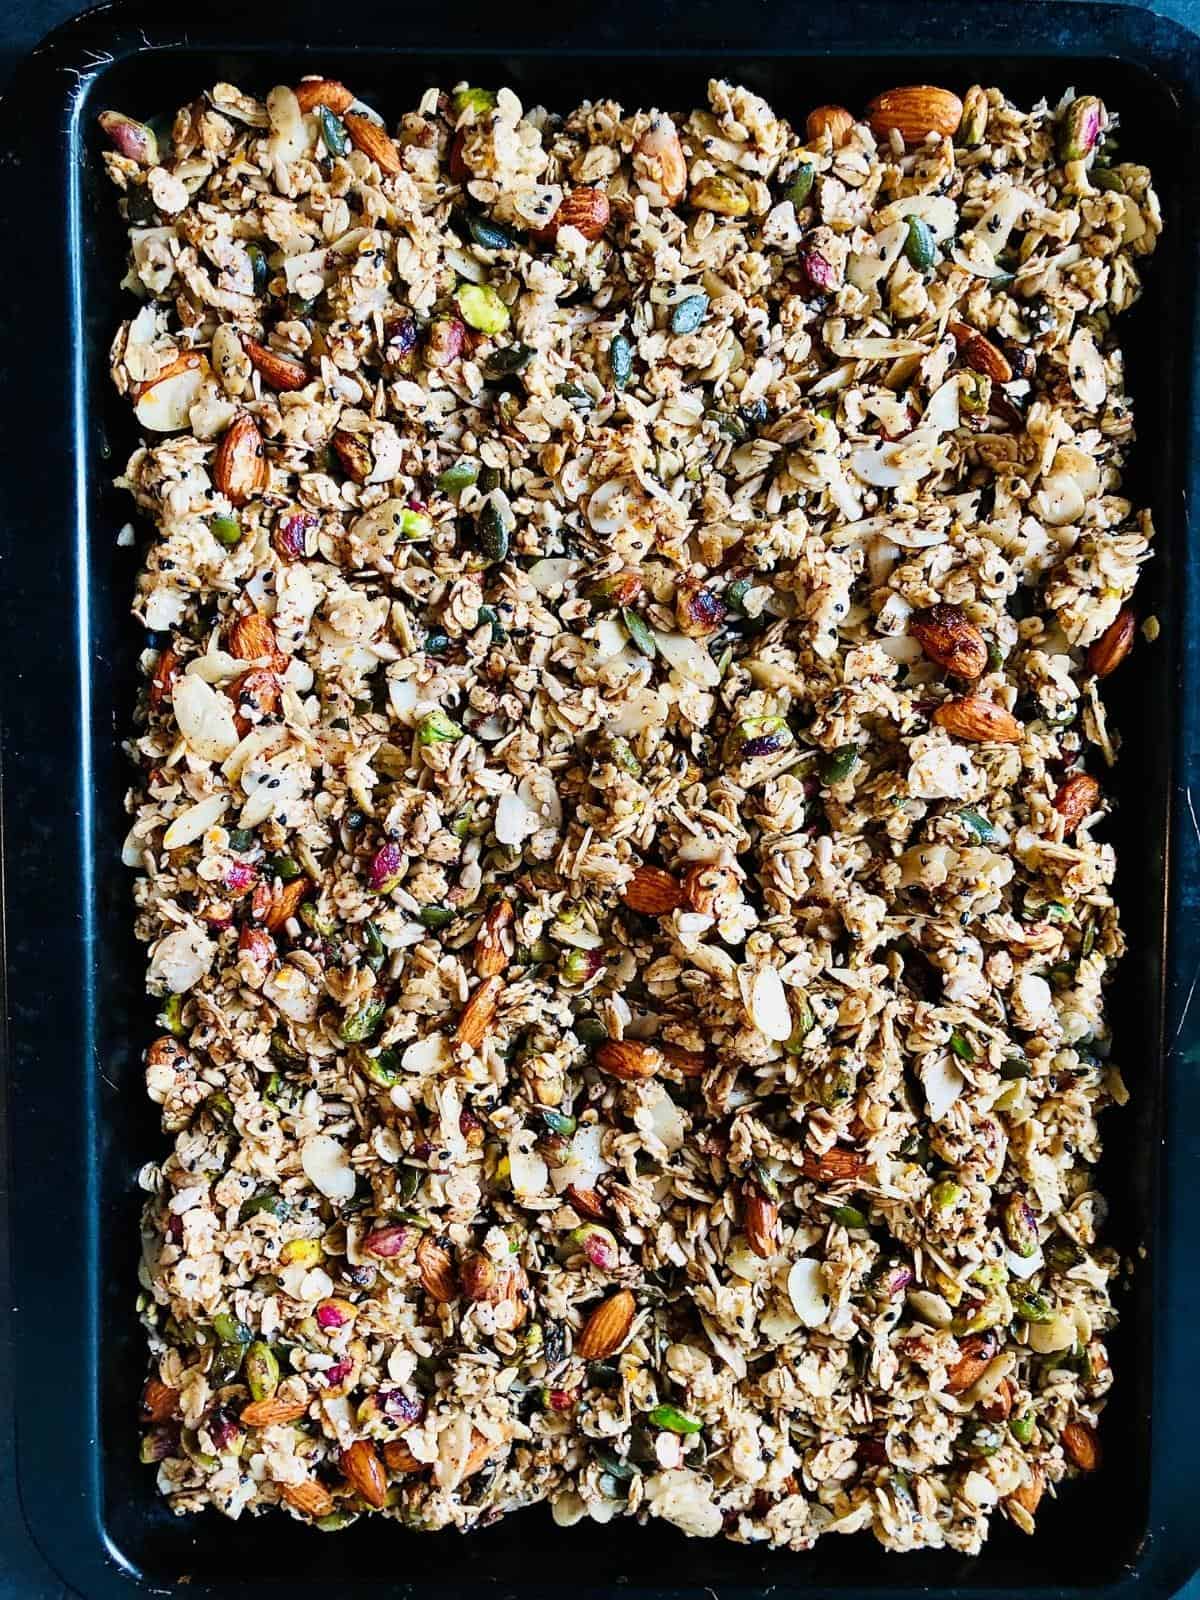 Orange blossom granola spread out on a baking tray ready to cook